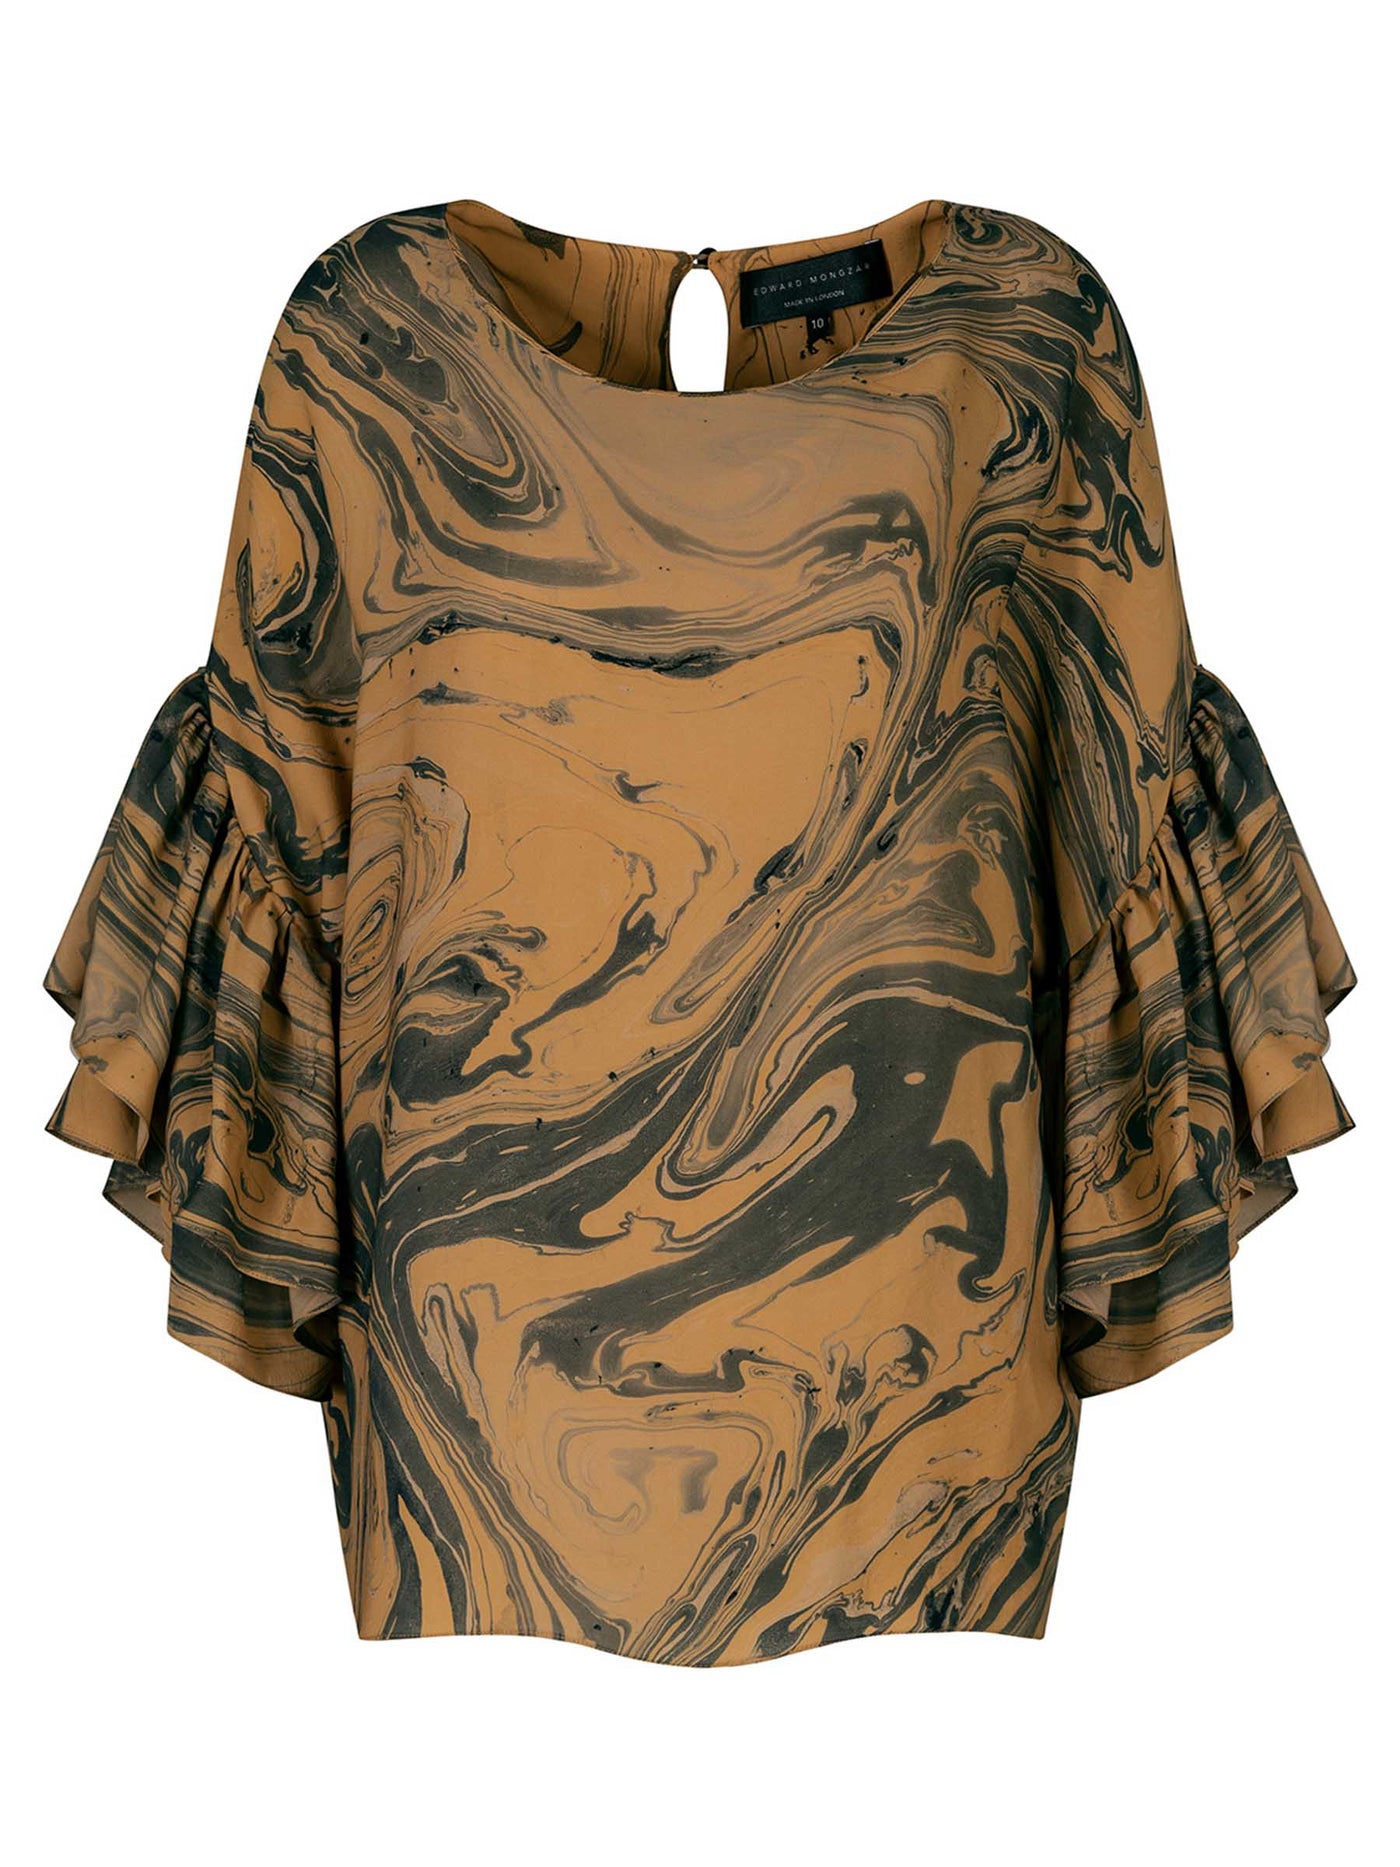 Edward Mongzar Silk Hand Marbled Ruffle Top in Orange and Black